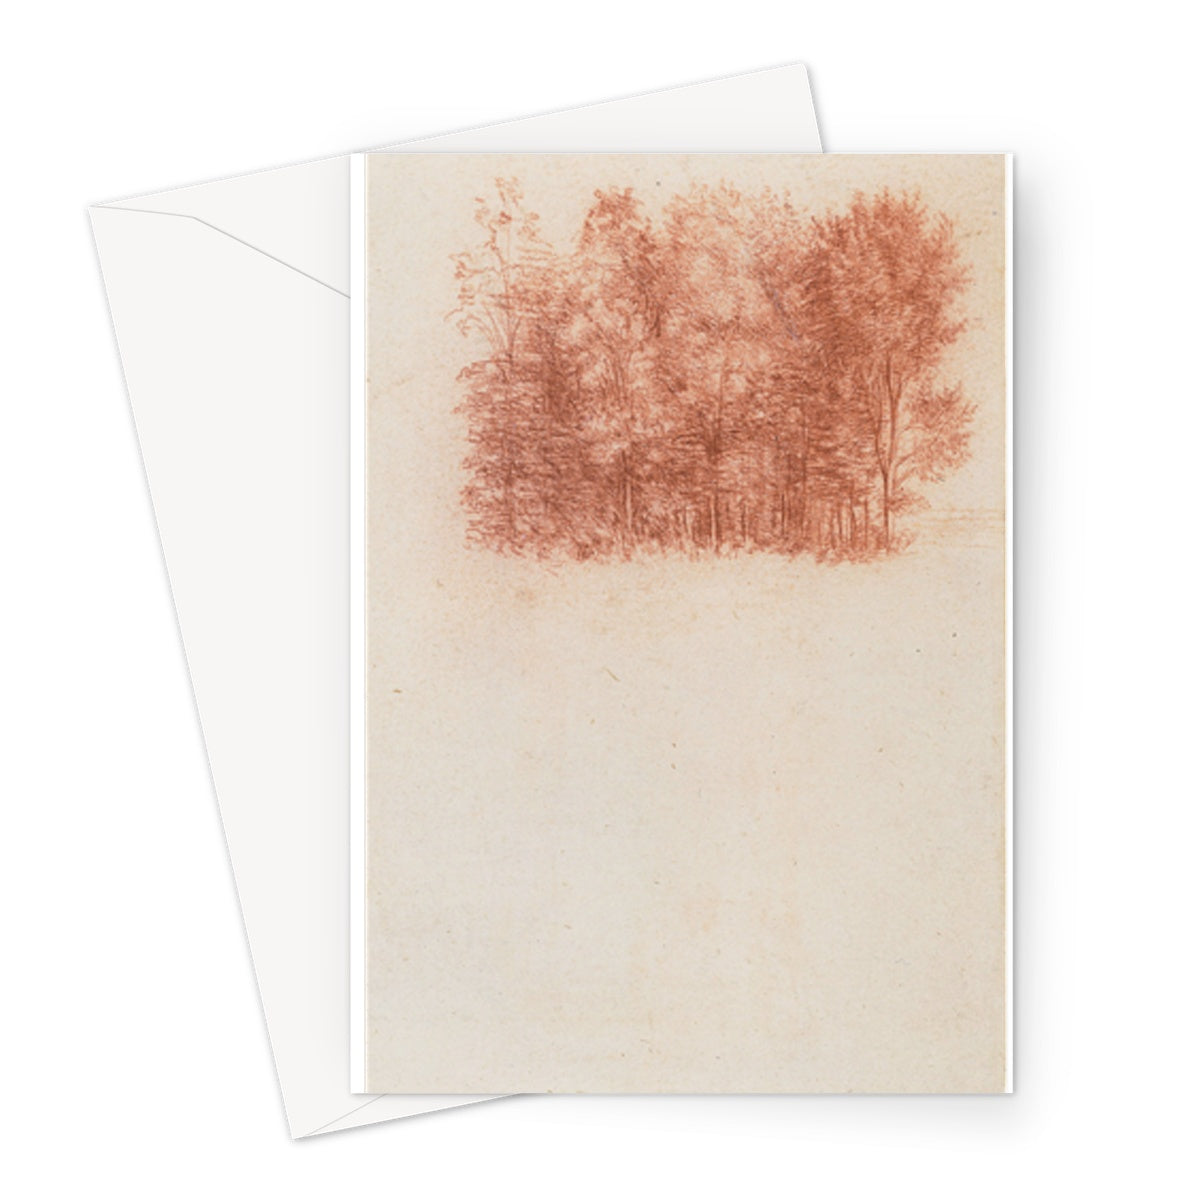 A Drawing of a Stand of Trees by Leonardo da Vinci, c.1500 - Greeting Card